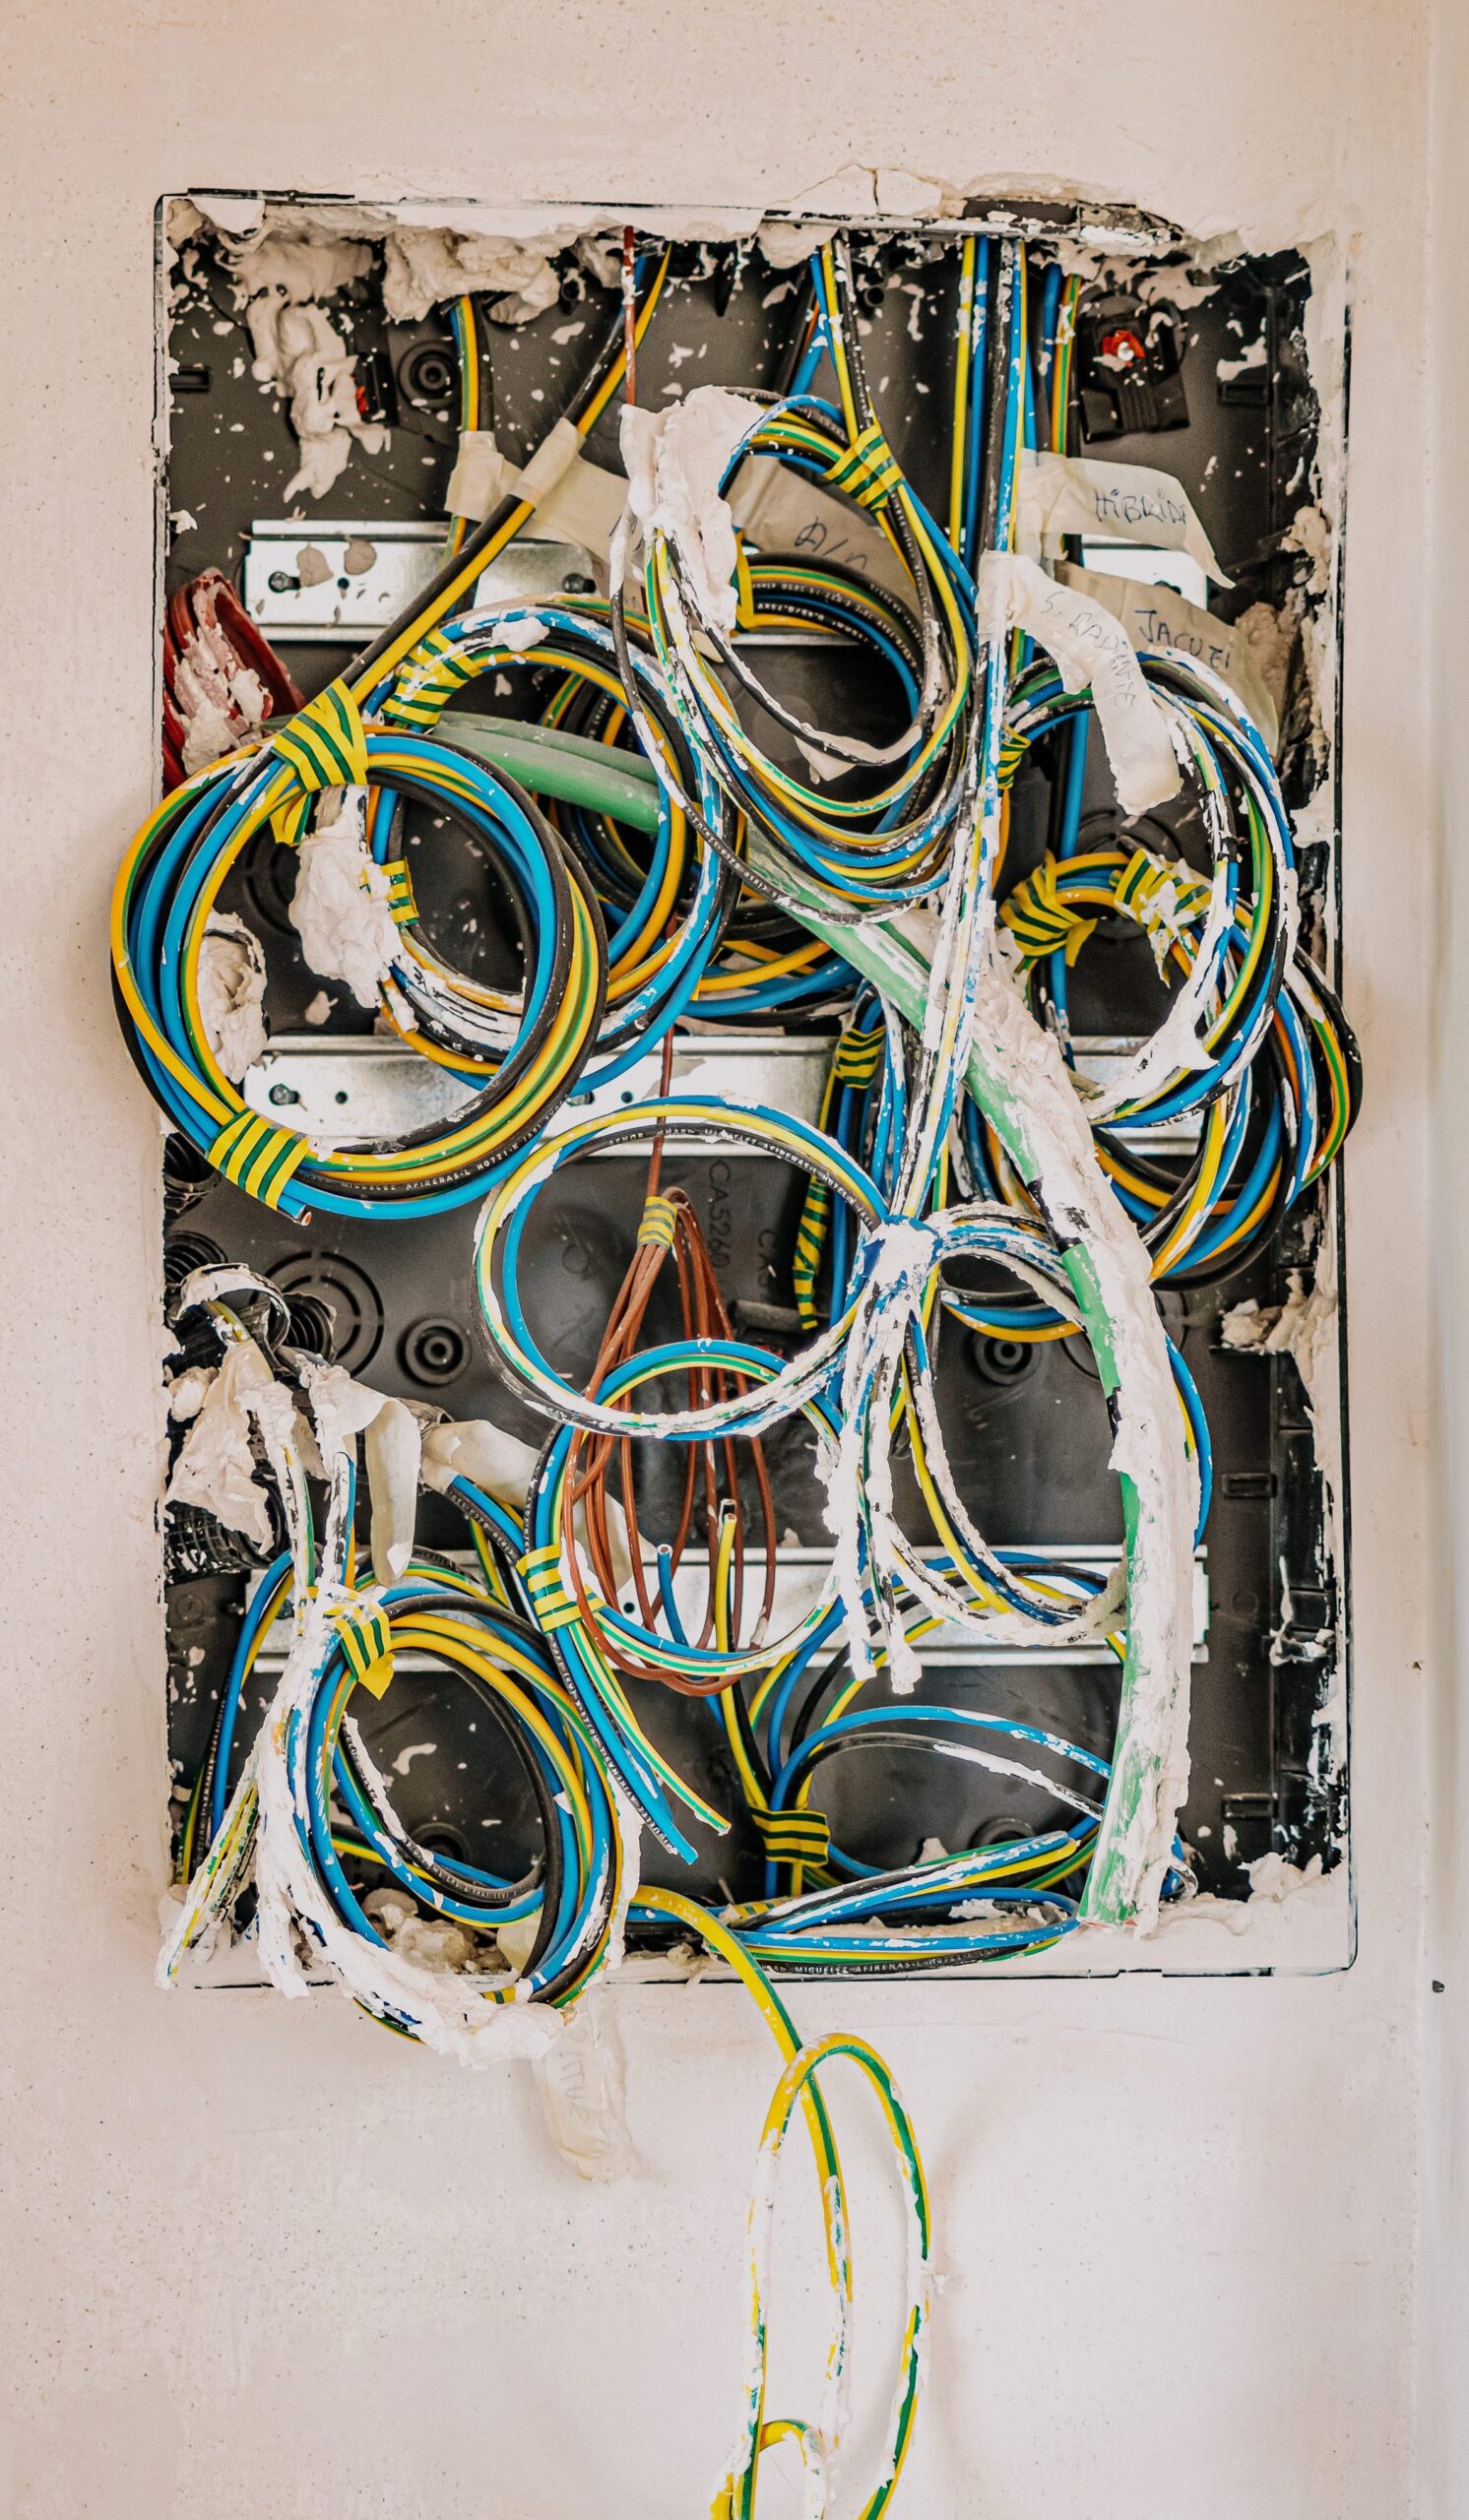 How Much Does An Electrical Safety Certificate Cost?